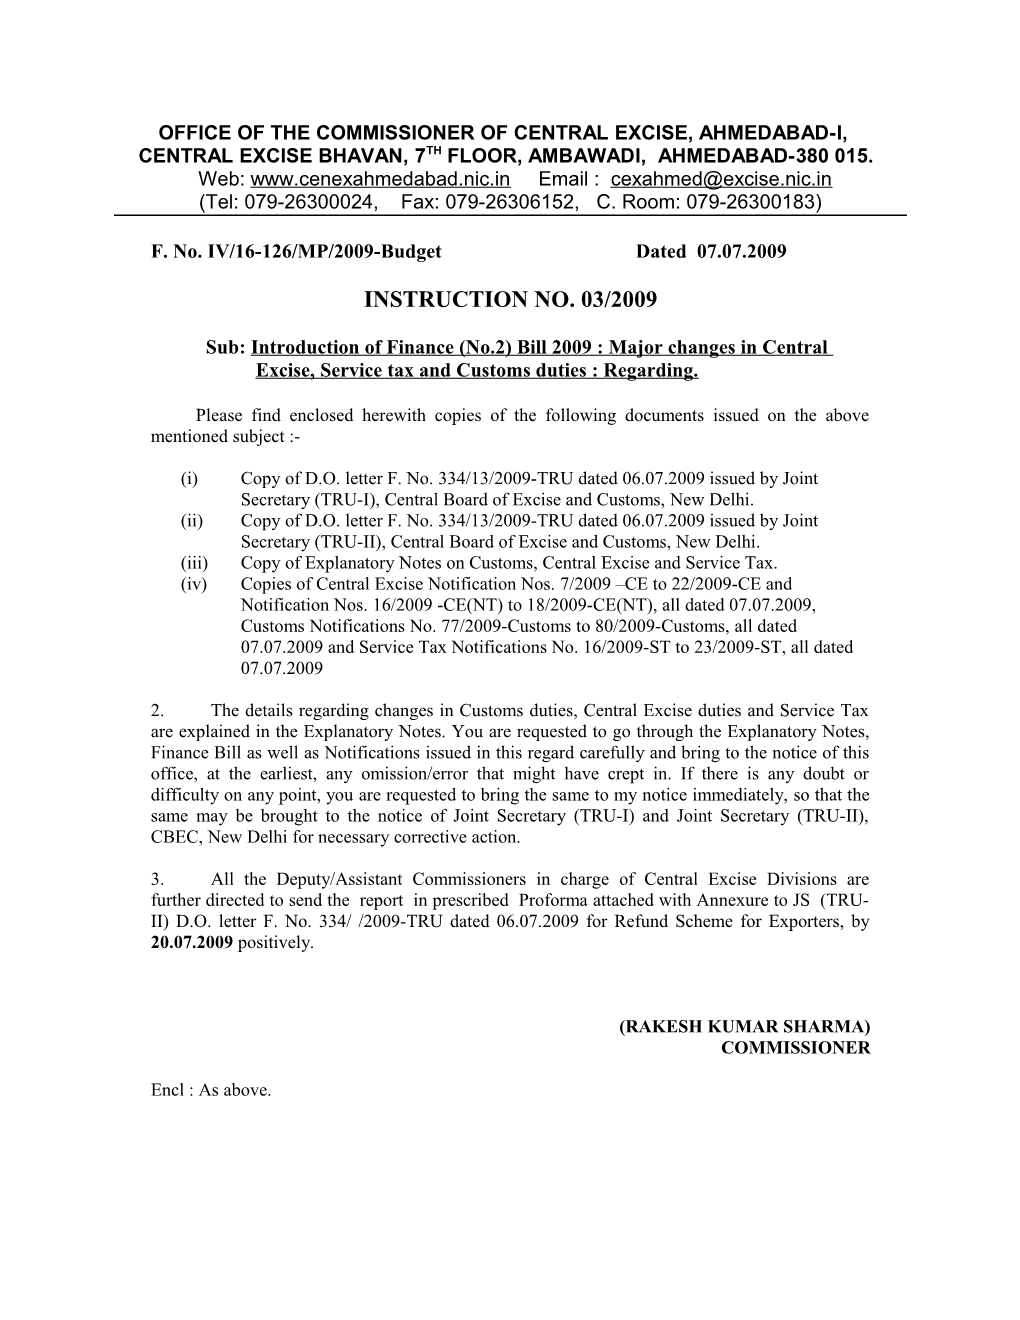 F. No. IV/16-126/MP/2009-Budget Dated 07.07.2009